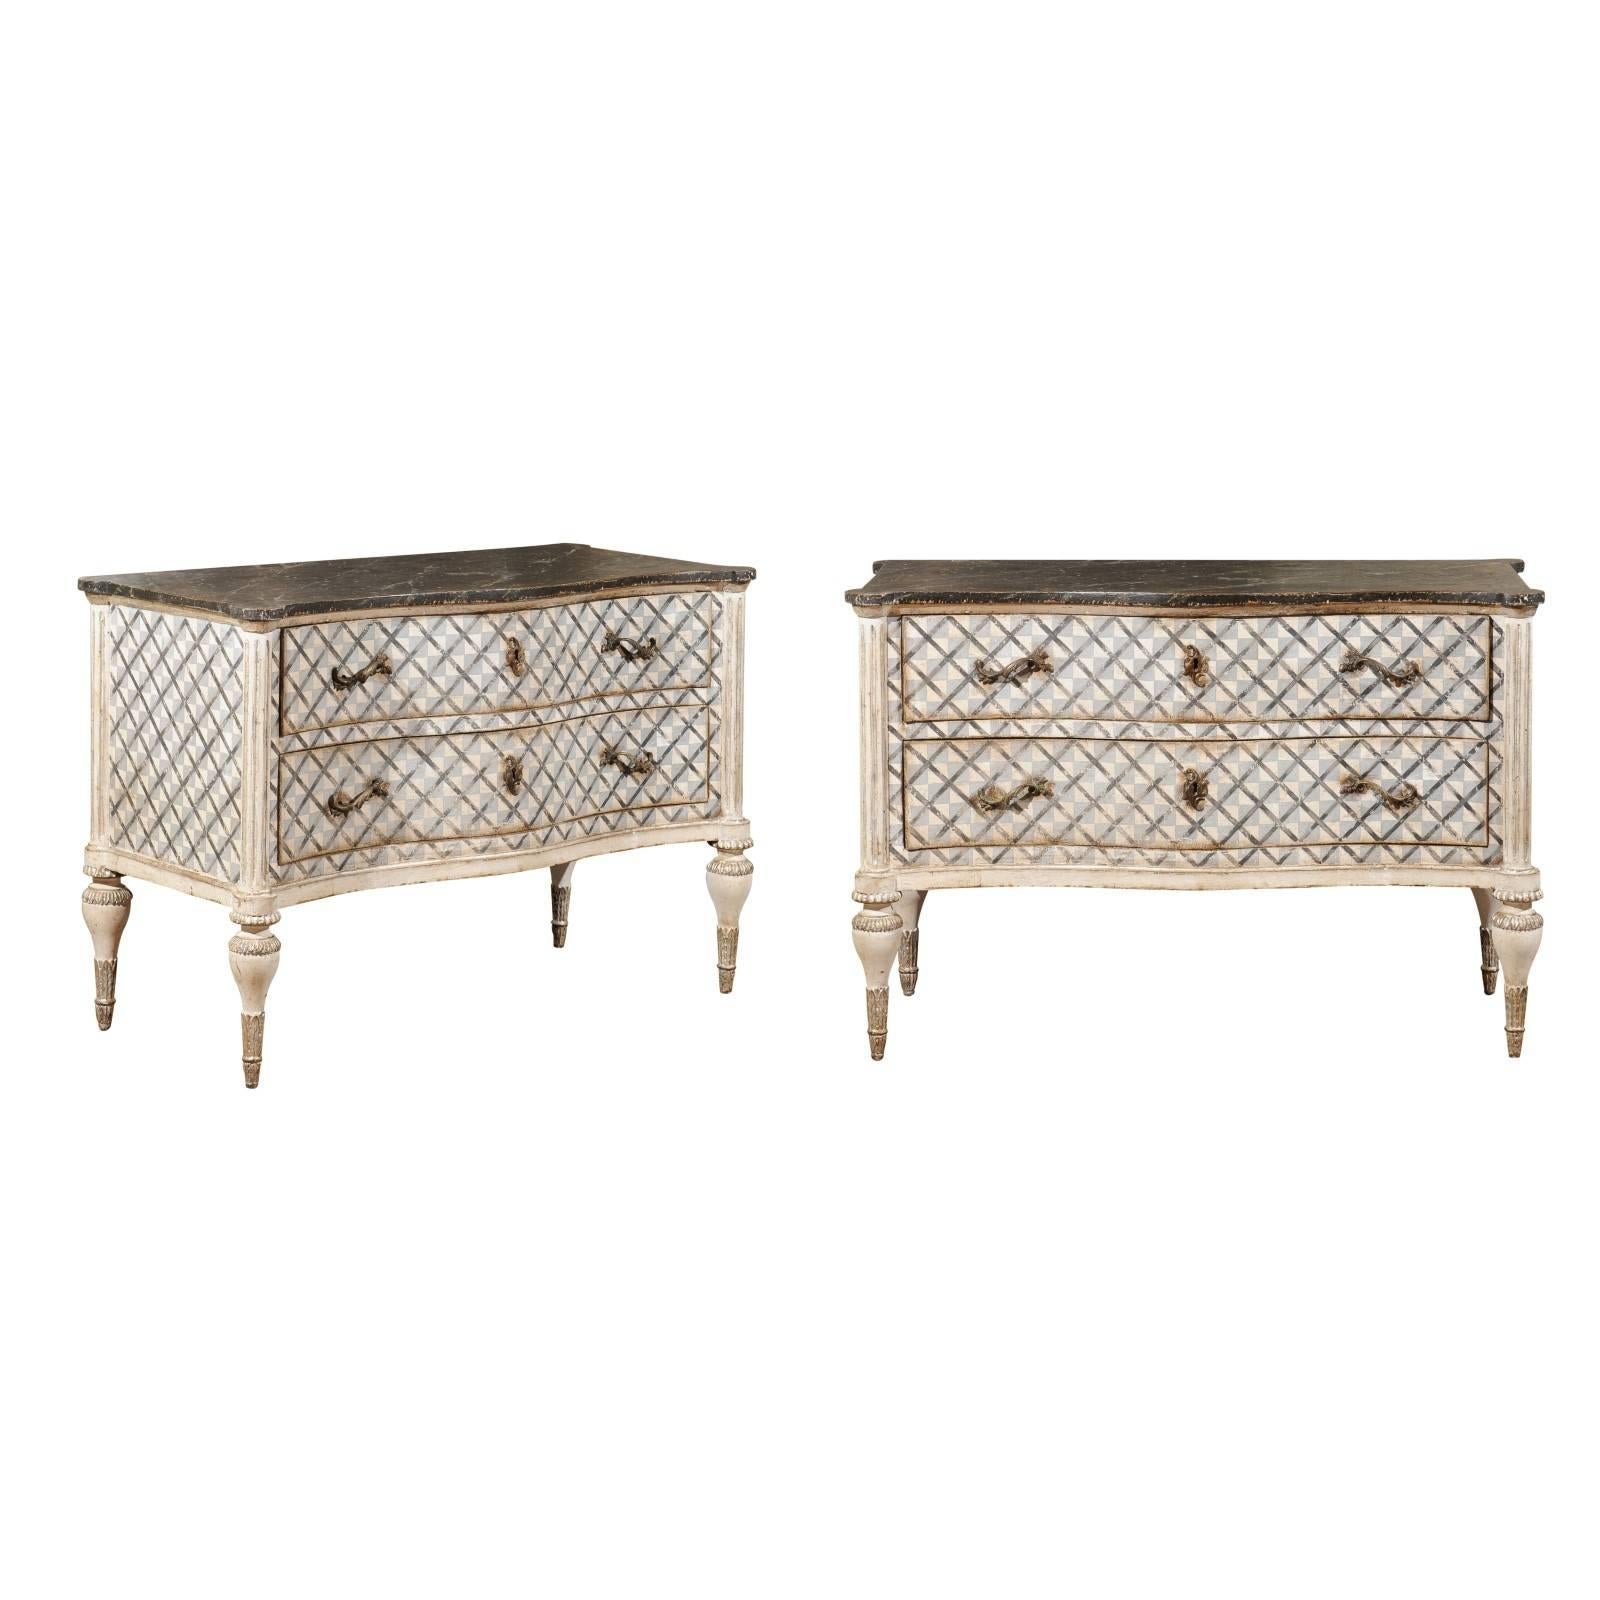 Venetian 1860s Hand-Painted Serpentine Two-Drawer Commodes with Silver Accents